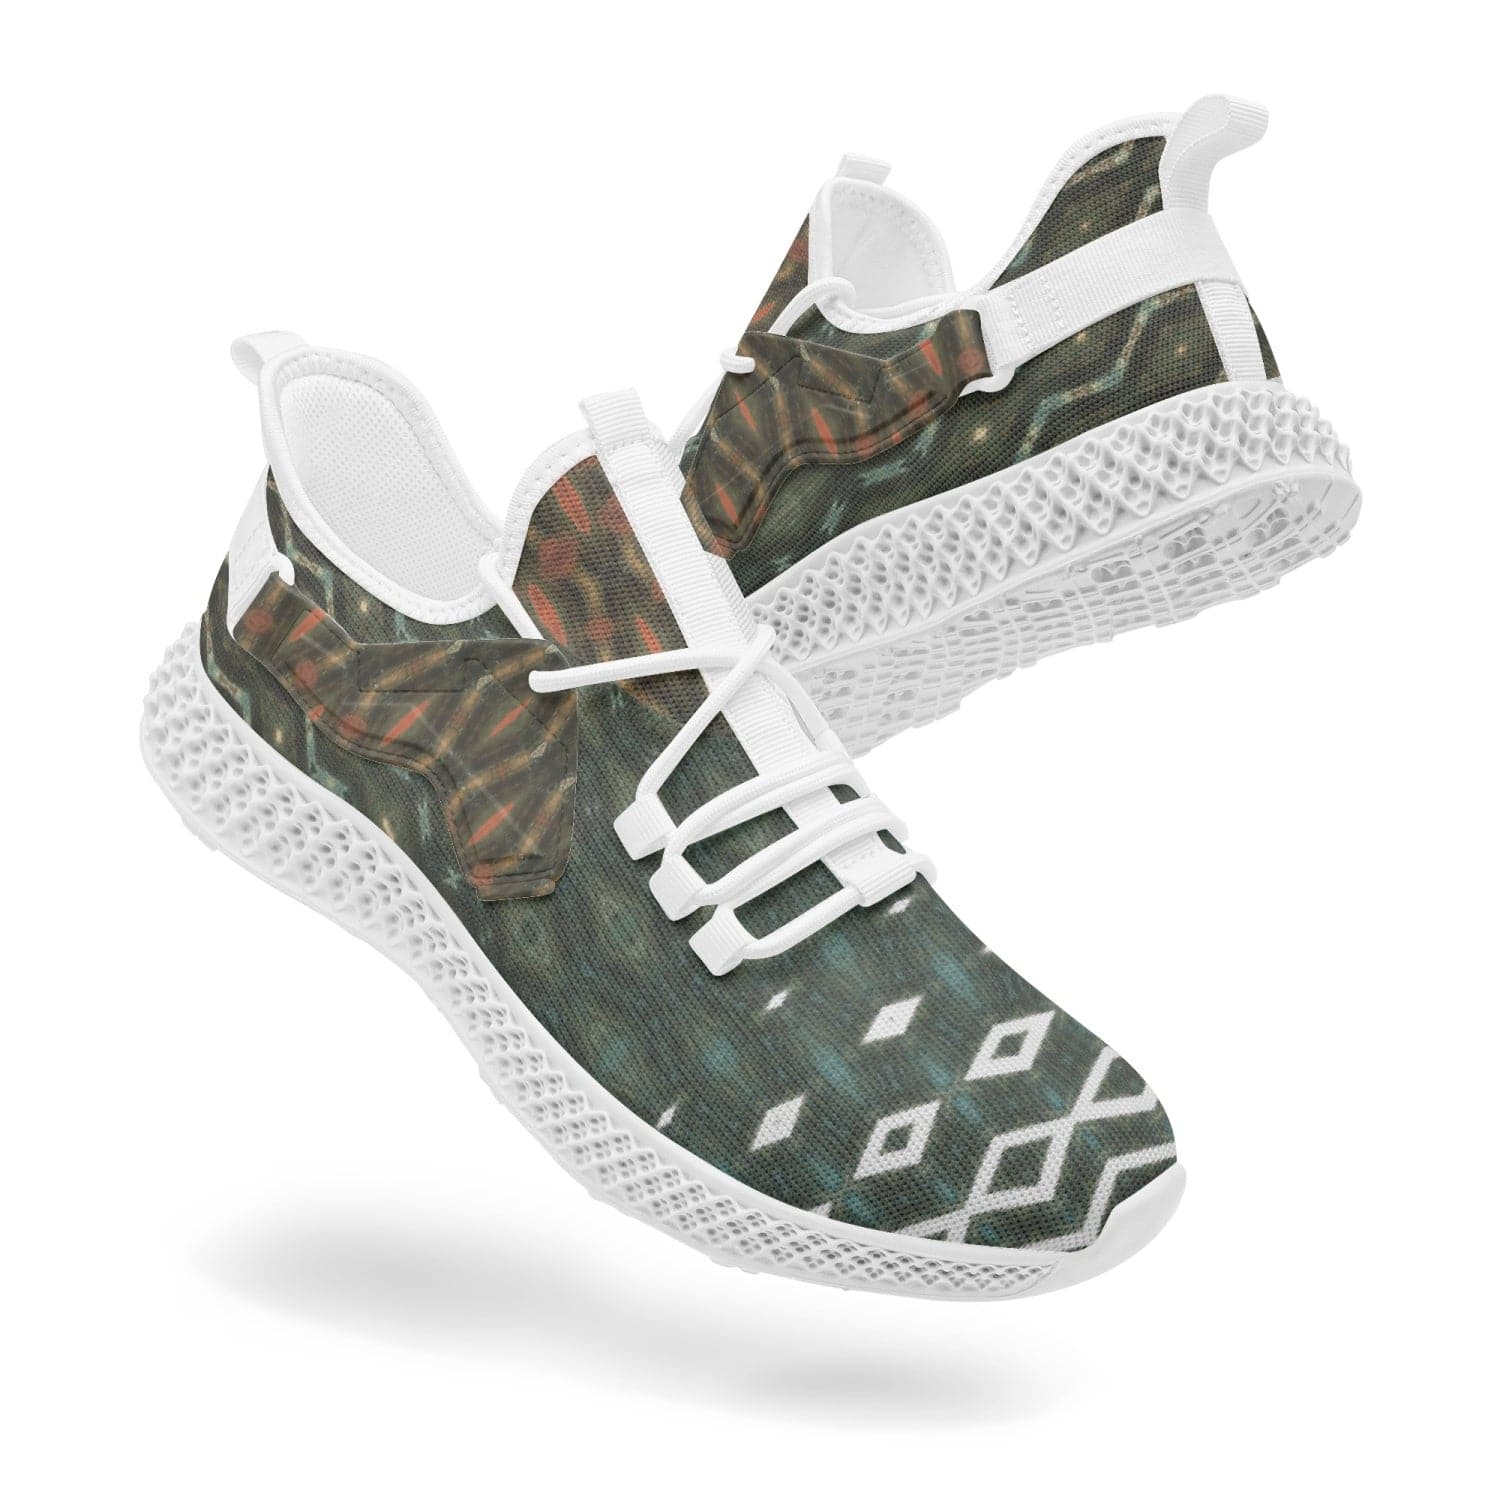 The Art of Green and Brown, Men's Sports  Net Style Mesh Knit Sneakers, by Sensus Studio Design